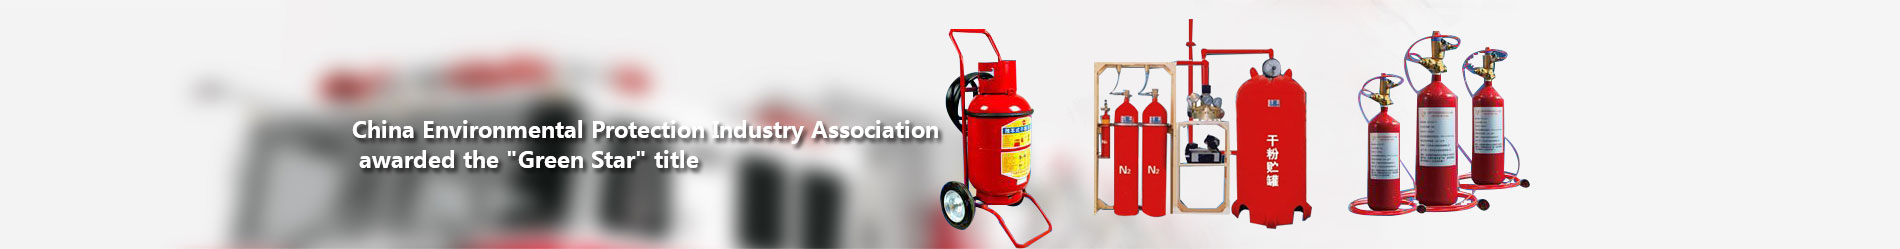 Fire protection products |Product display 